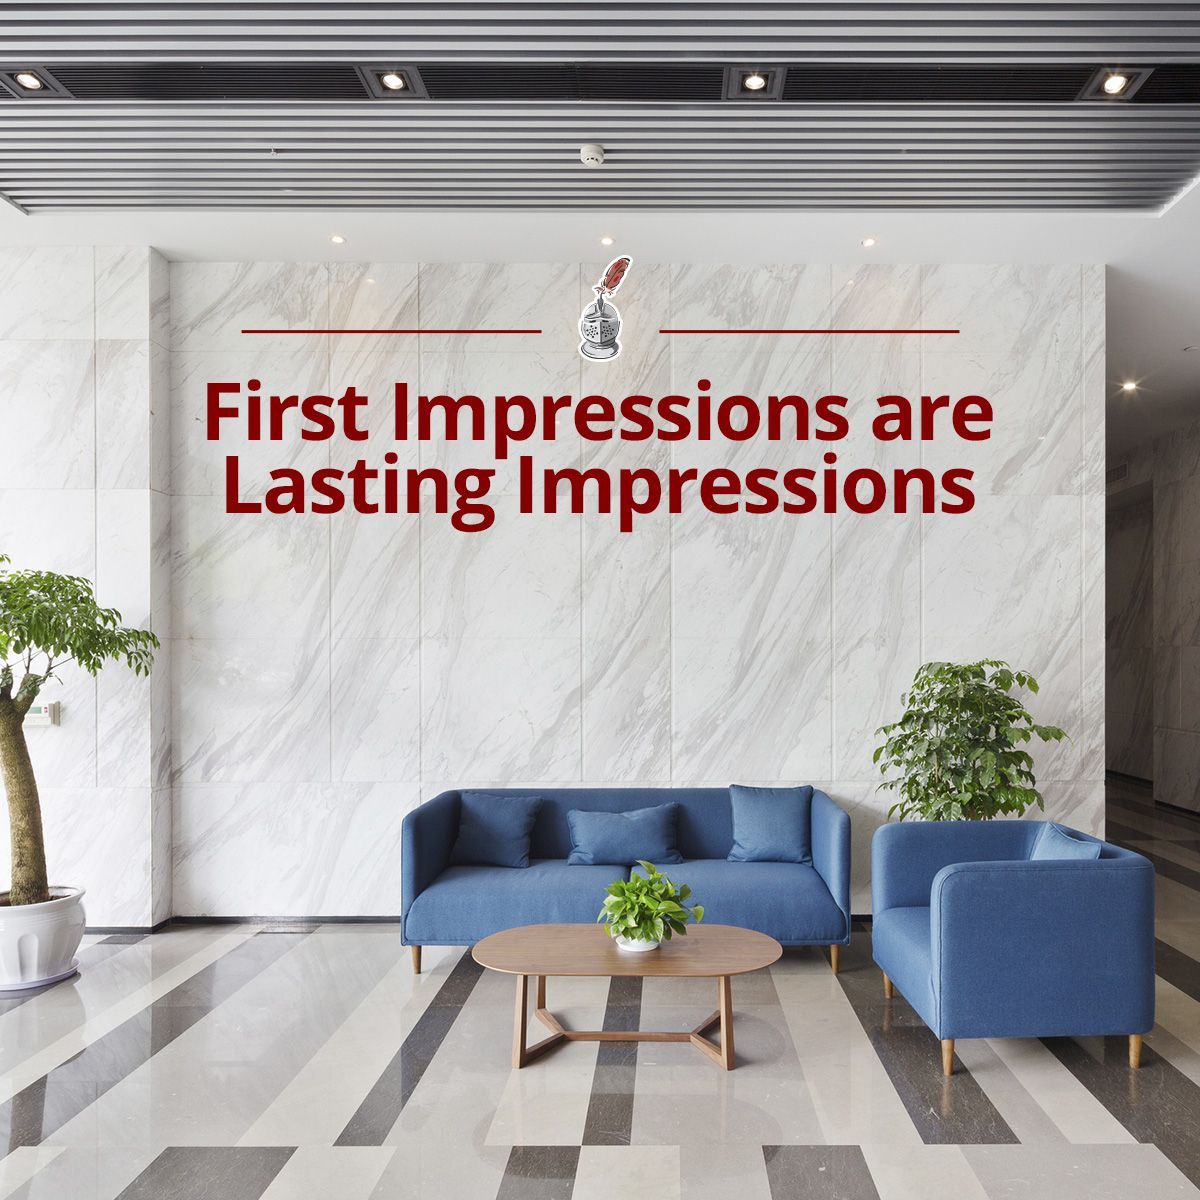 First Impressions are Lasting Impressions